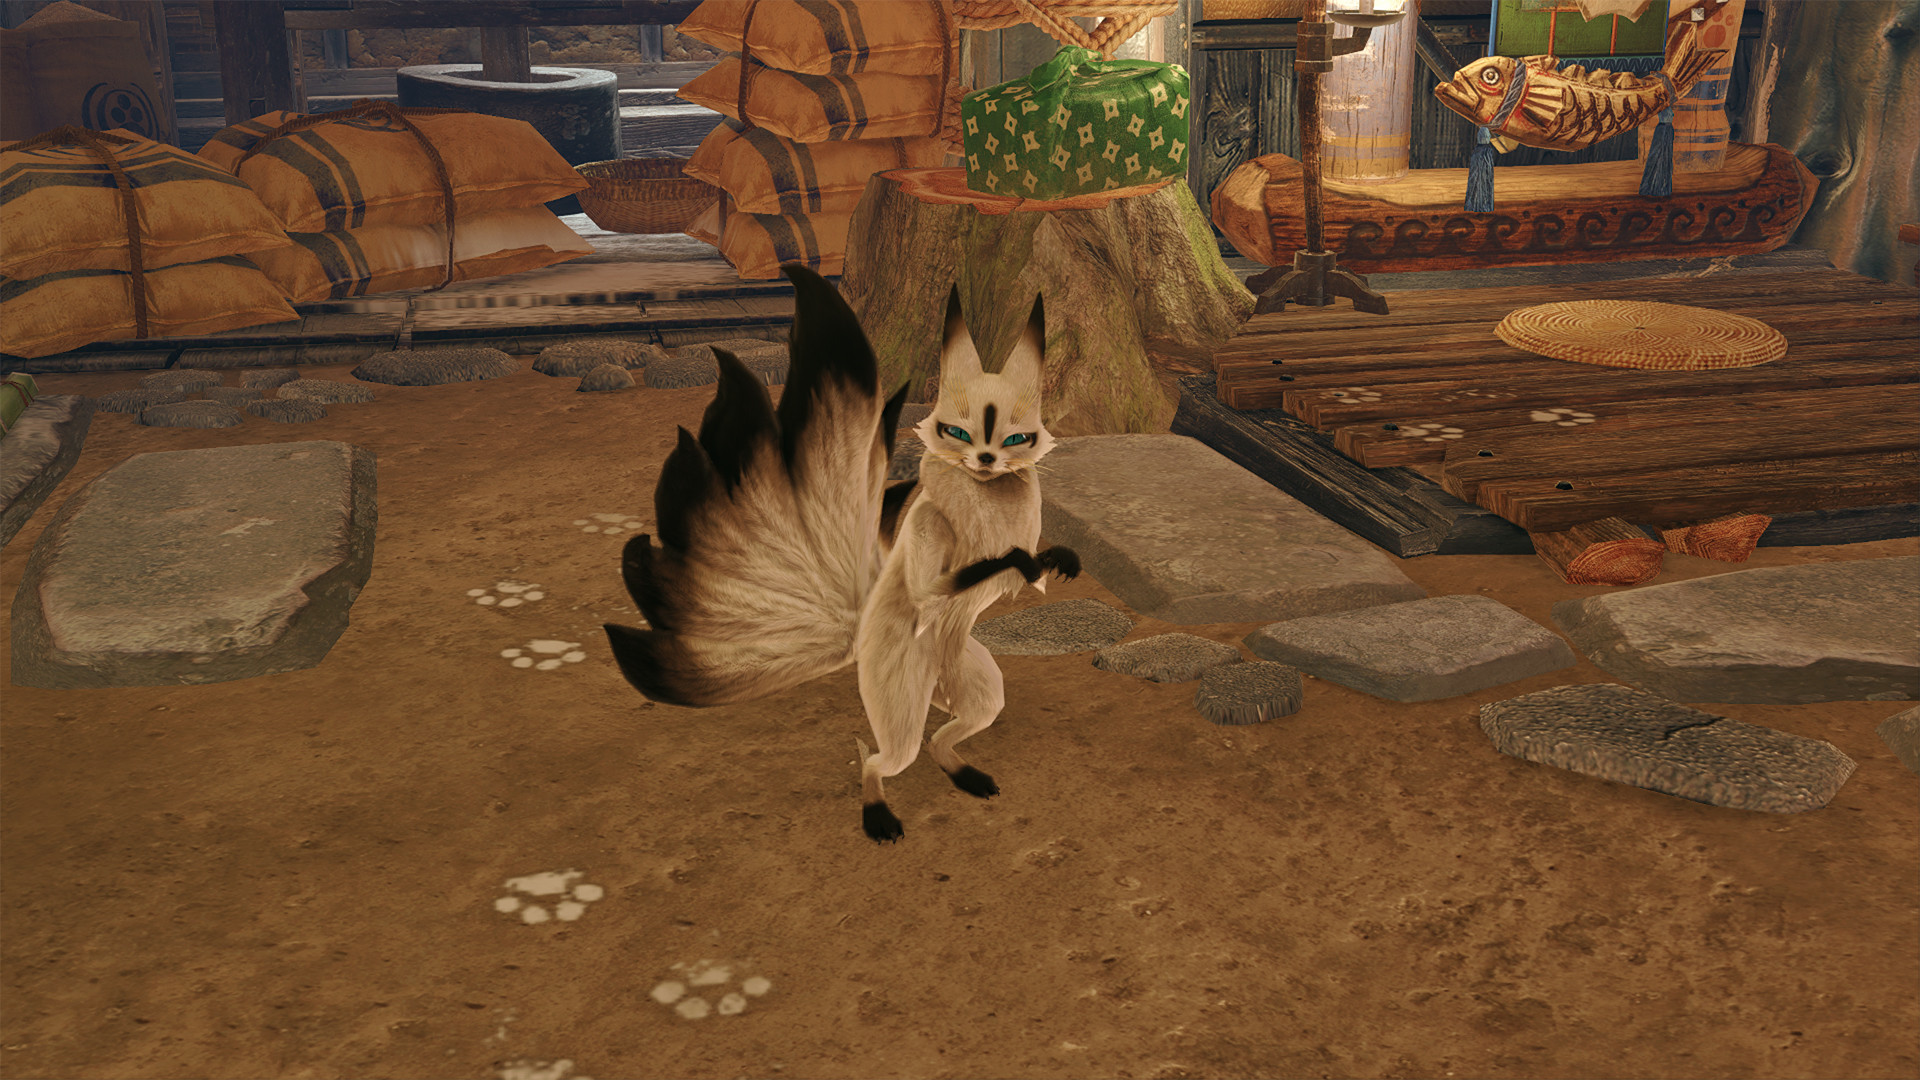 MONSTER HUNTER RISE - "Nine Tails" Palico layered armor set Featured Screenshot #1